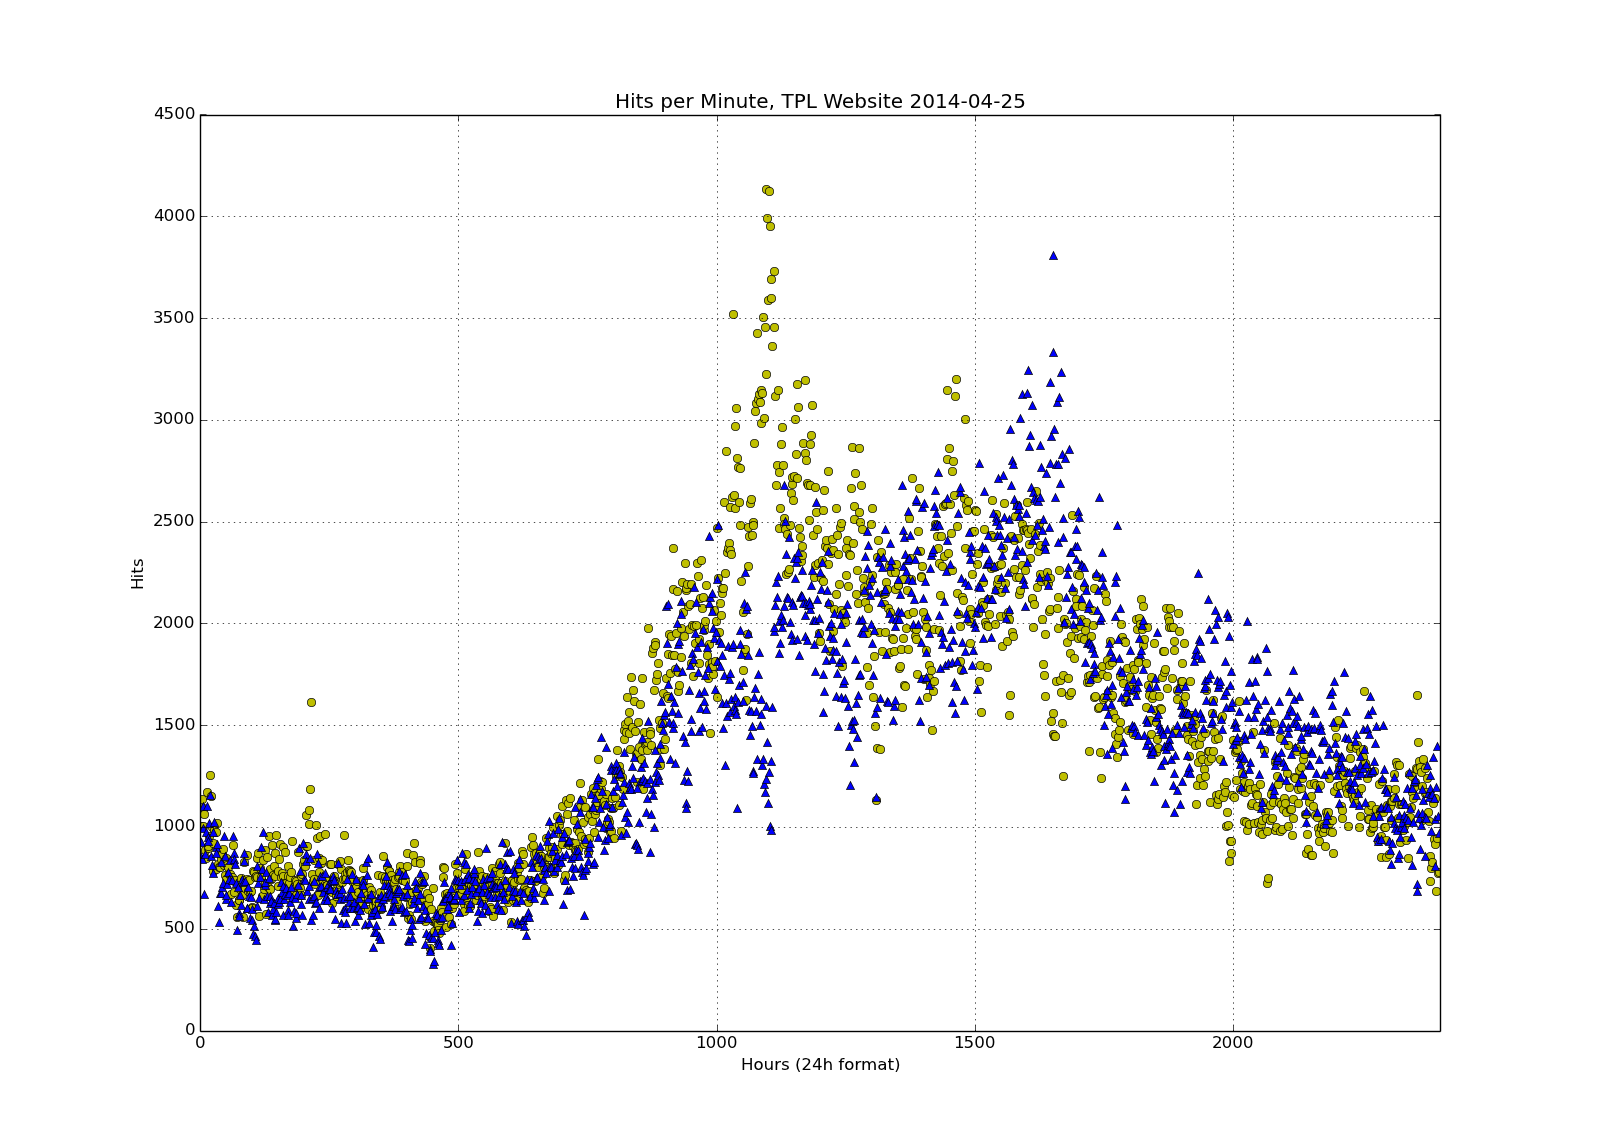 One day's dot plot showing hits per minute for two servers in different colours - now on a 24 hour scale